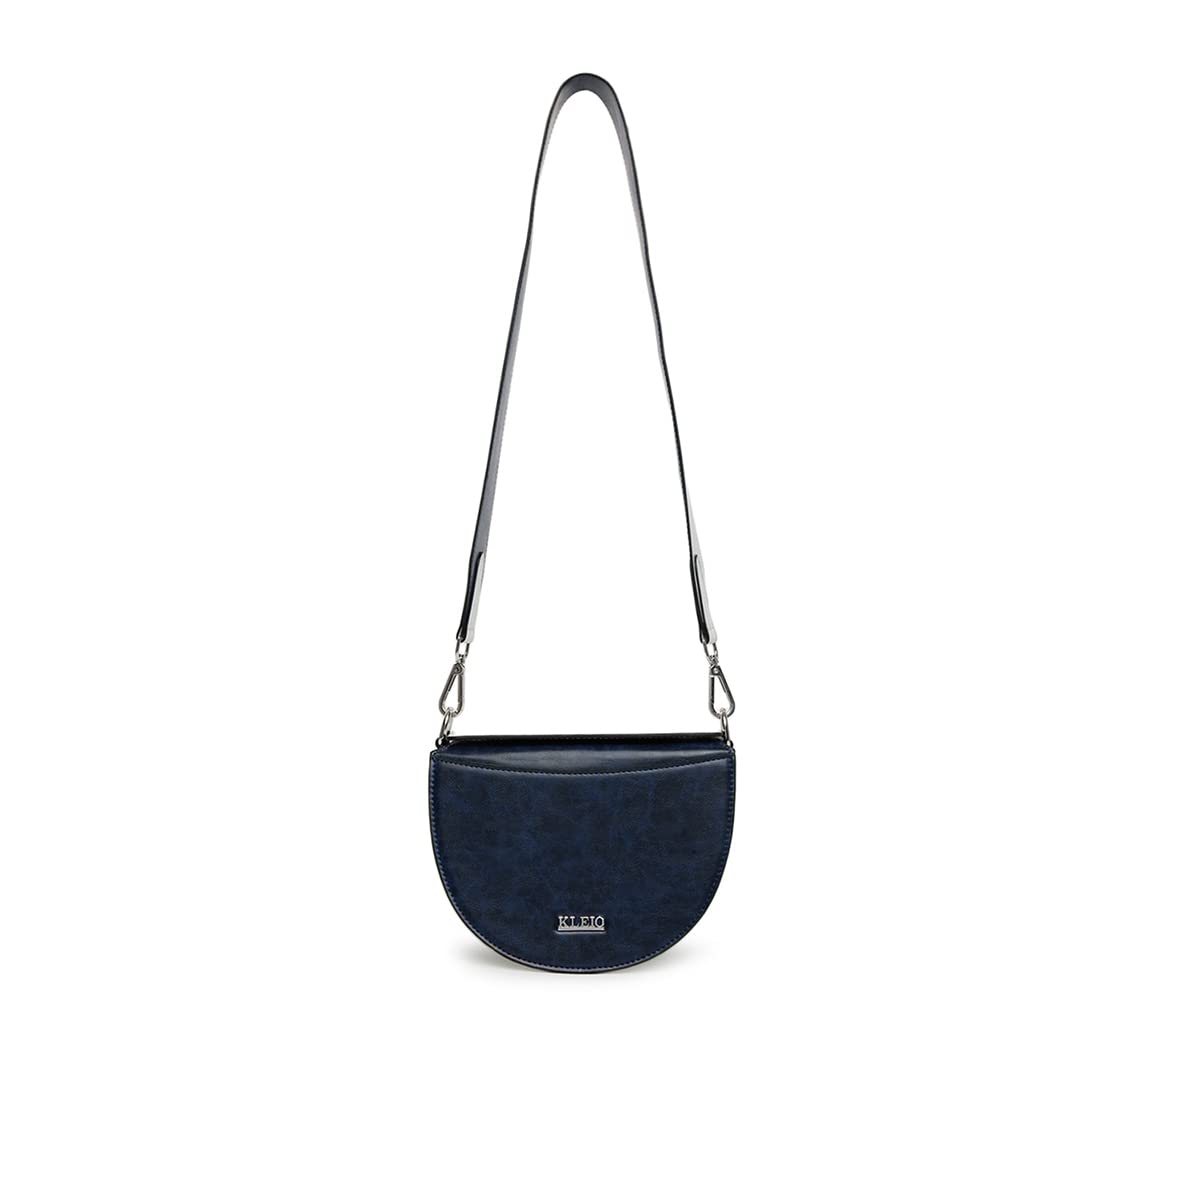 KLEIO Vegan Leather Half Moon Structured Dual Handle Sling Bag (Navy Blue) for Women | Spacious Crossbody Bag for Girls with Magnetic Flap Closure to Carry Make-up, Cash & Cards